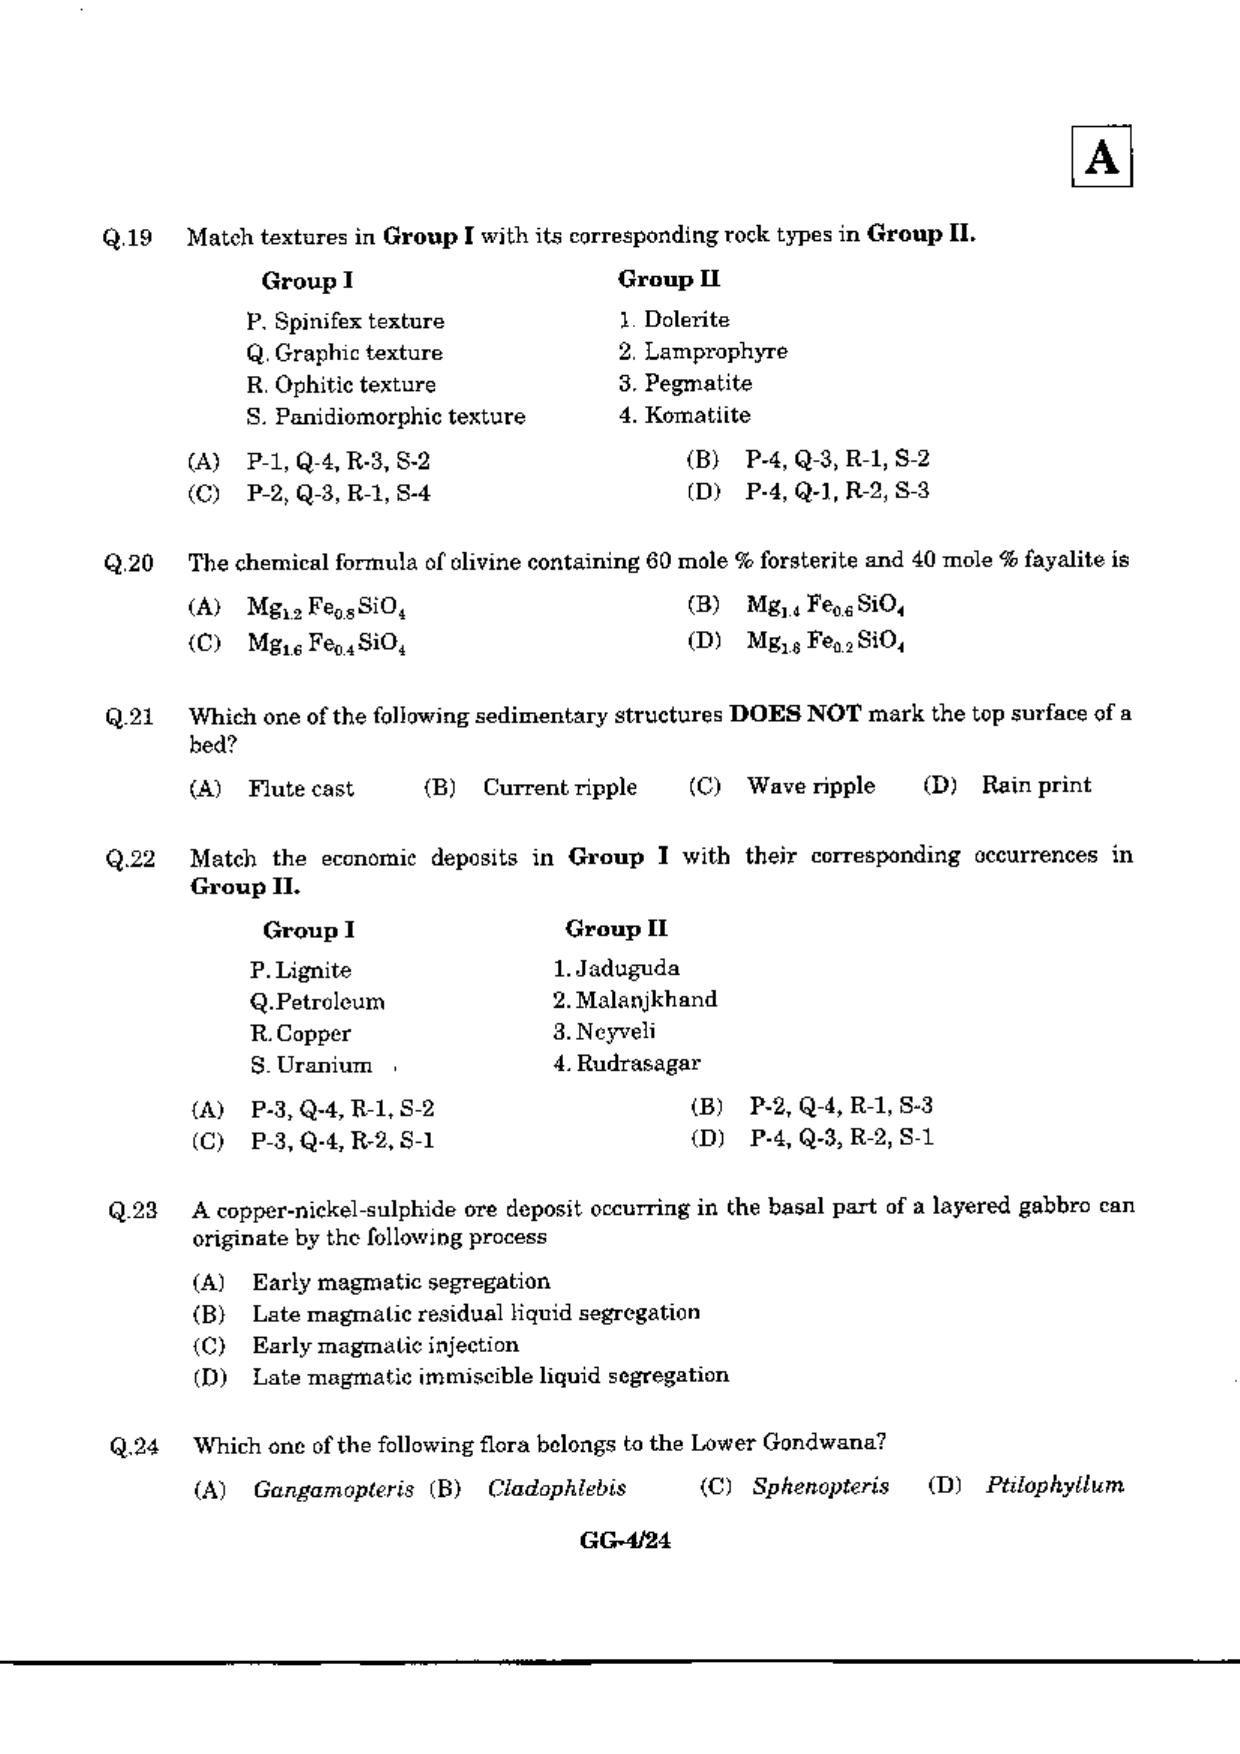 JAM 2010: GG Question Paper - Page 6